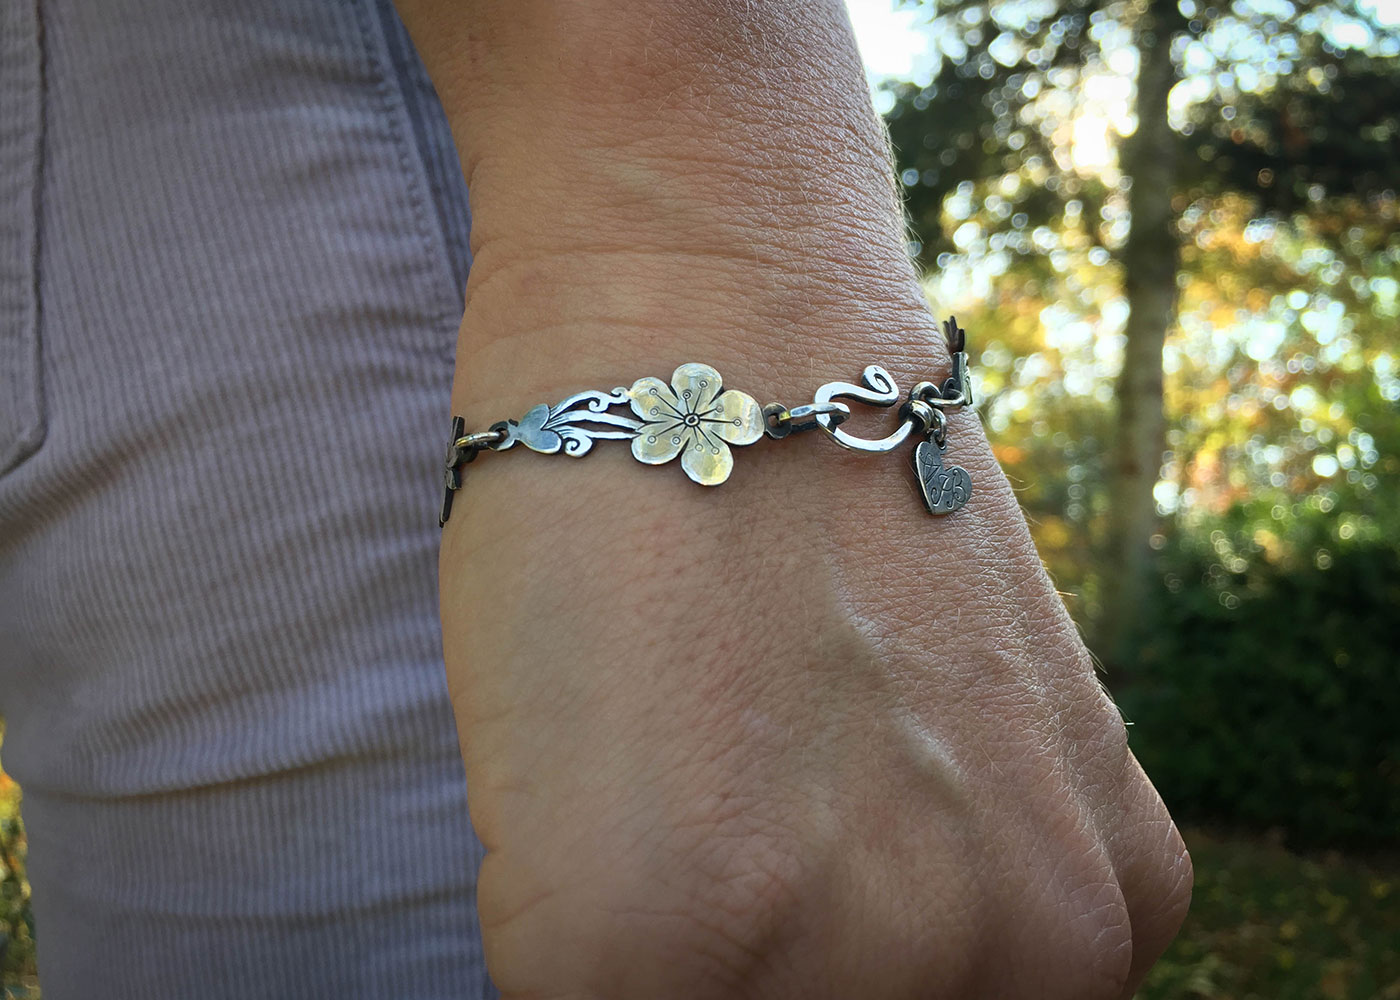 Wild flower bracelet made from recycled sterling silver coins